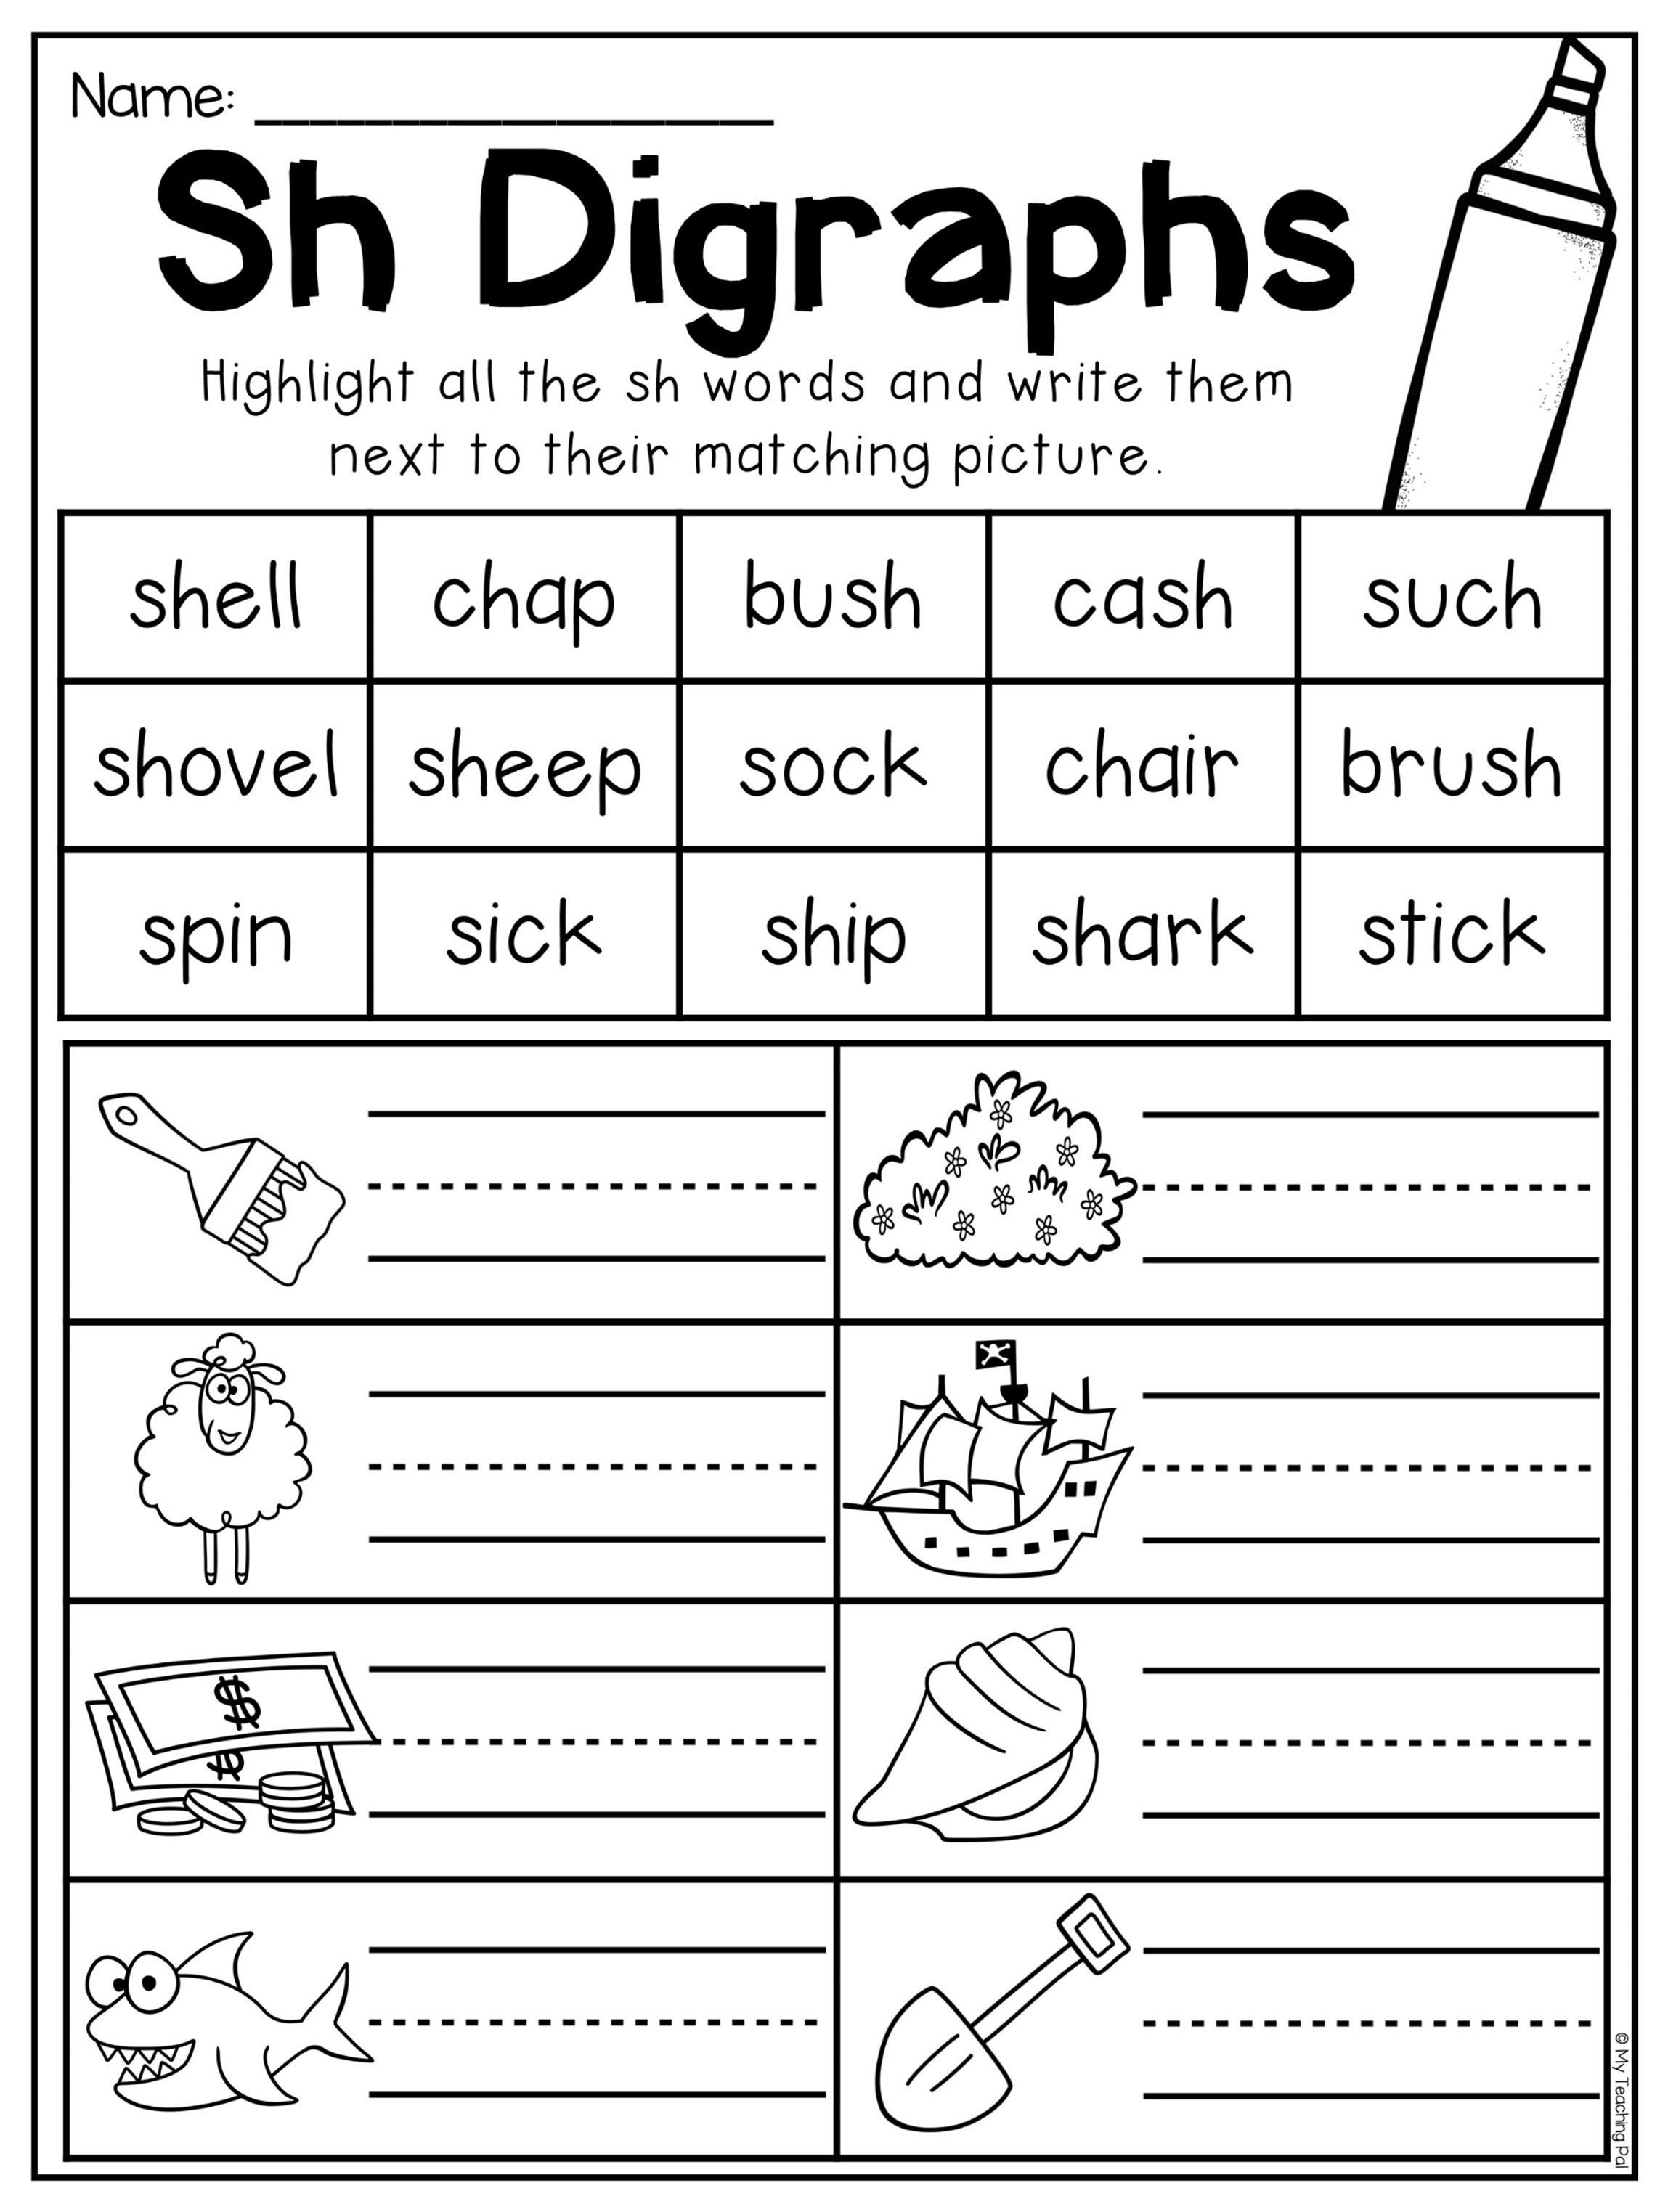 Free Printable Ch Digraph Worksheets | Free Printables | Digraphs Worksheets Free Printables